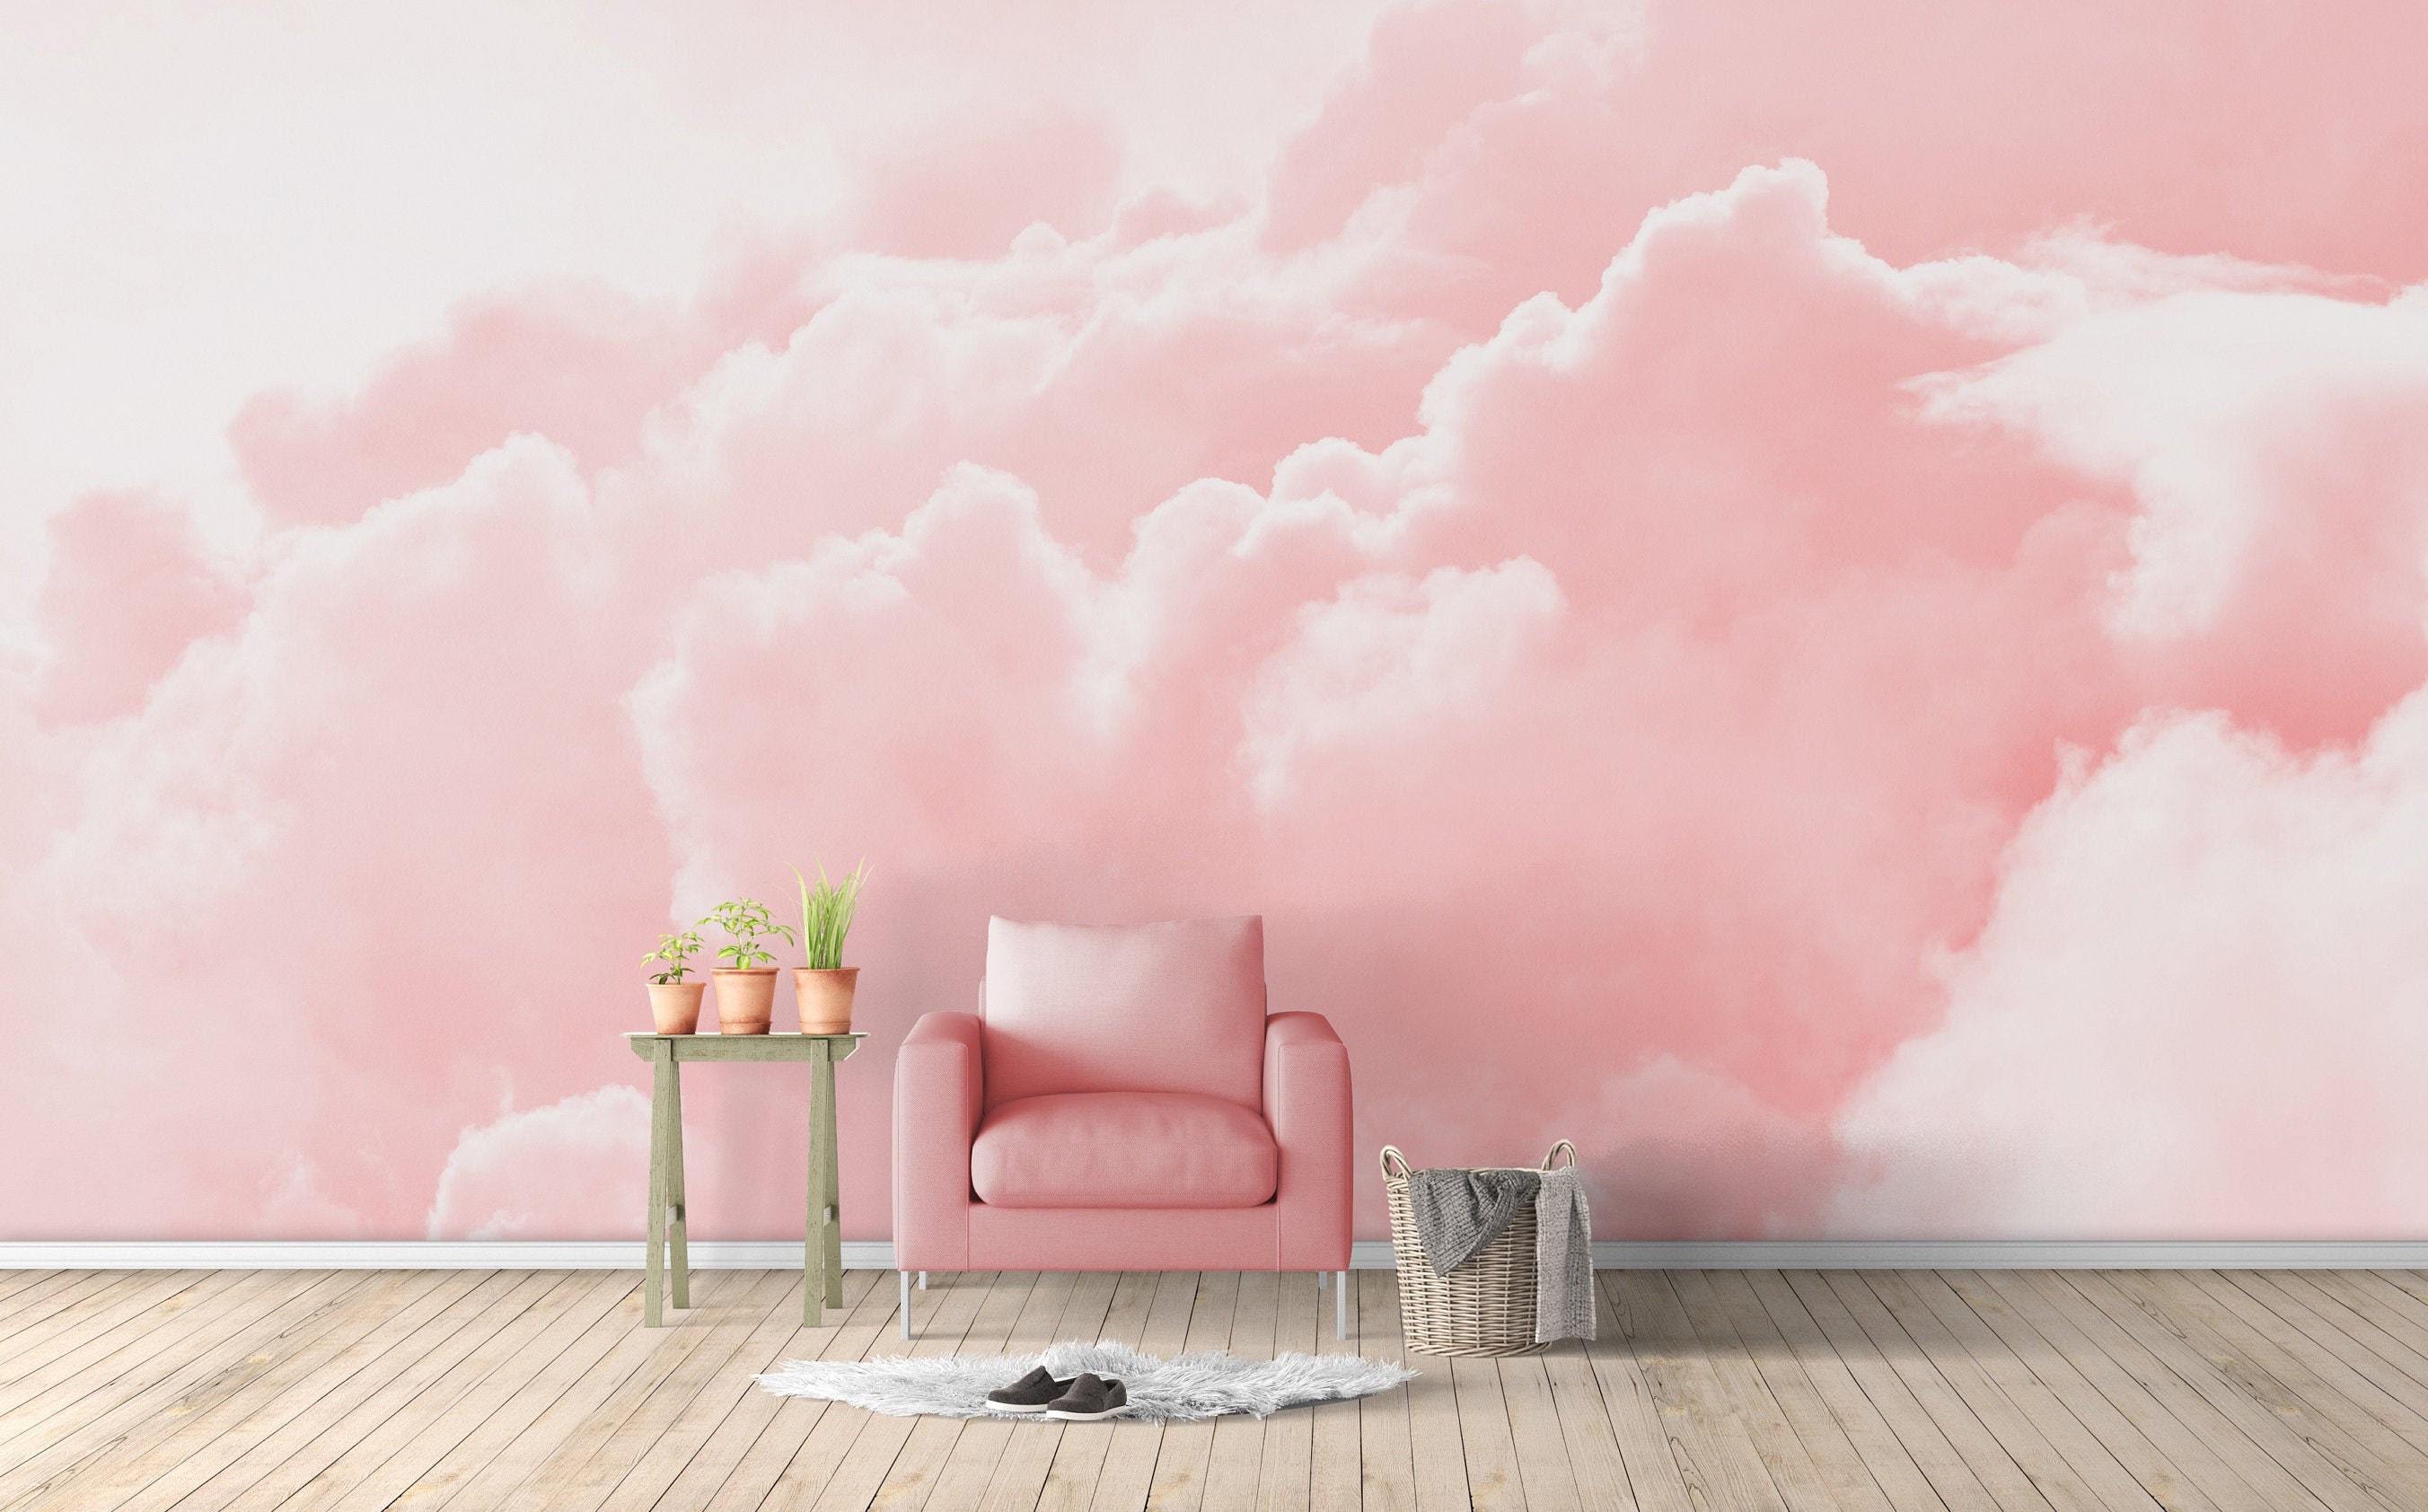 Colorful Cloud Wallpaper Aesthetic Room Decor Mural Home Bedroom Living  Room tv Background Large Wall Mural - 137x96 Not Peel and Stick